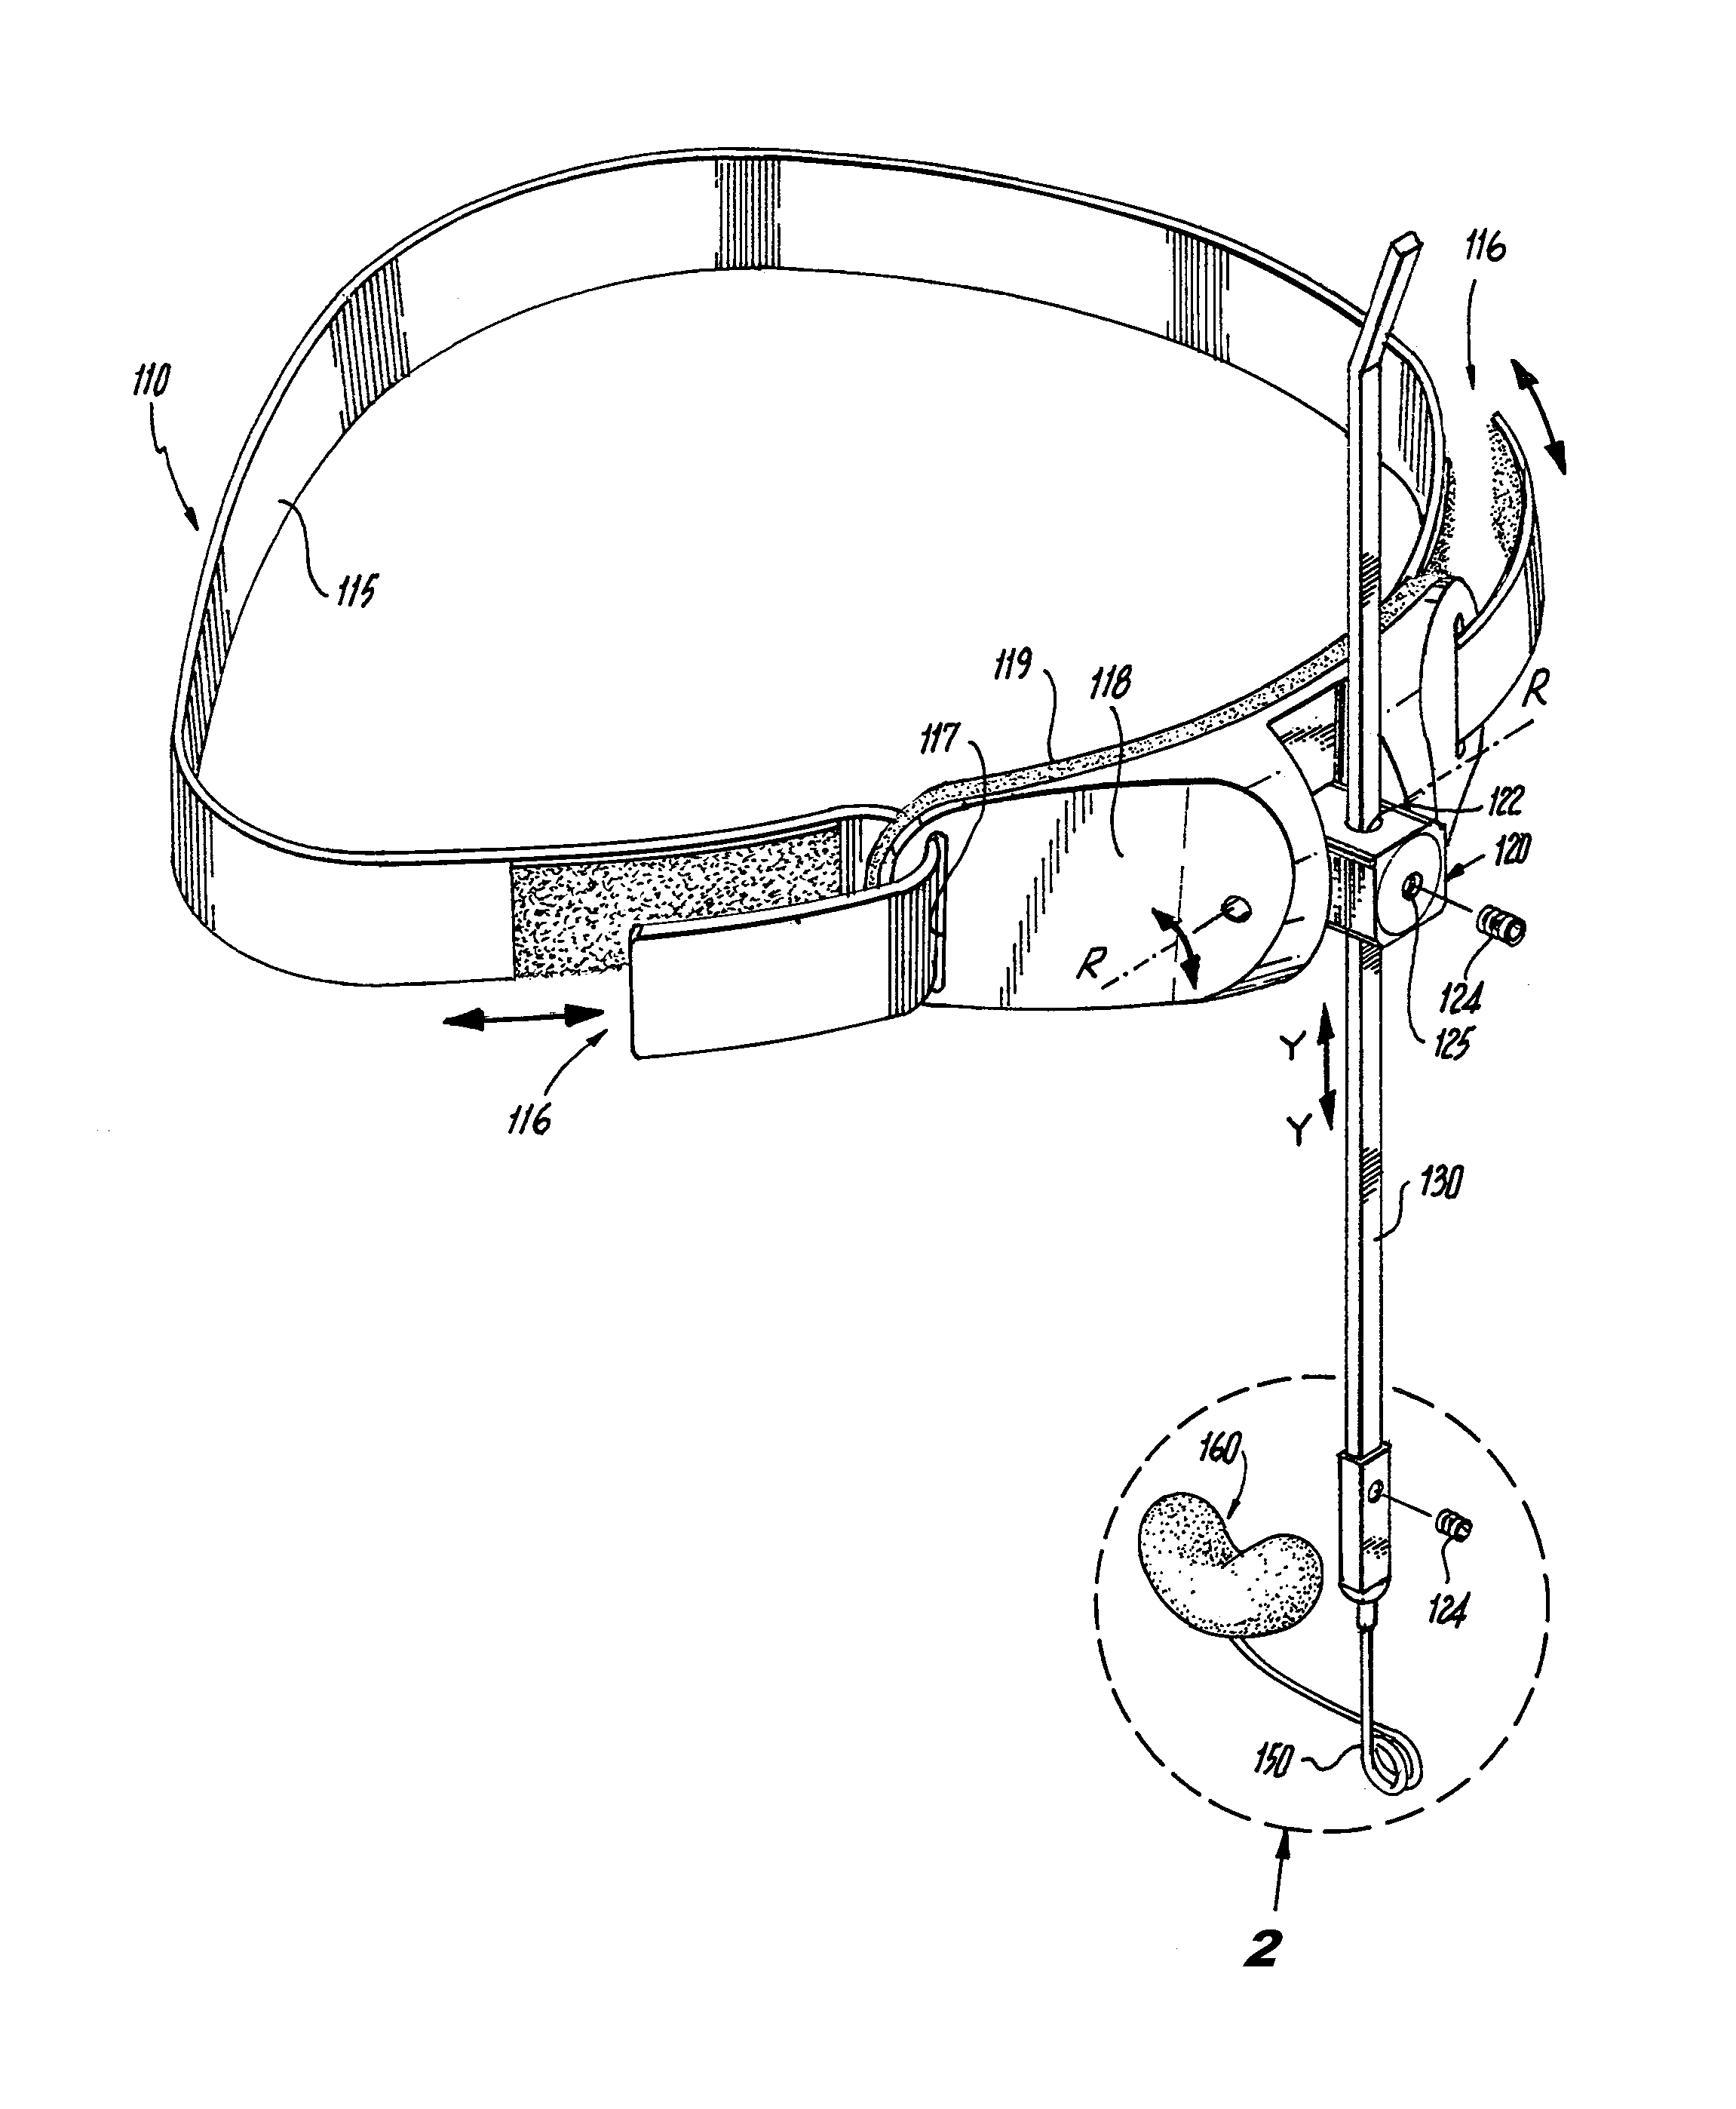 Extraoral nasal molding headgear device for the treatment of cleft lip and palate